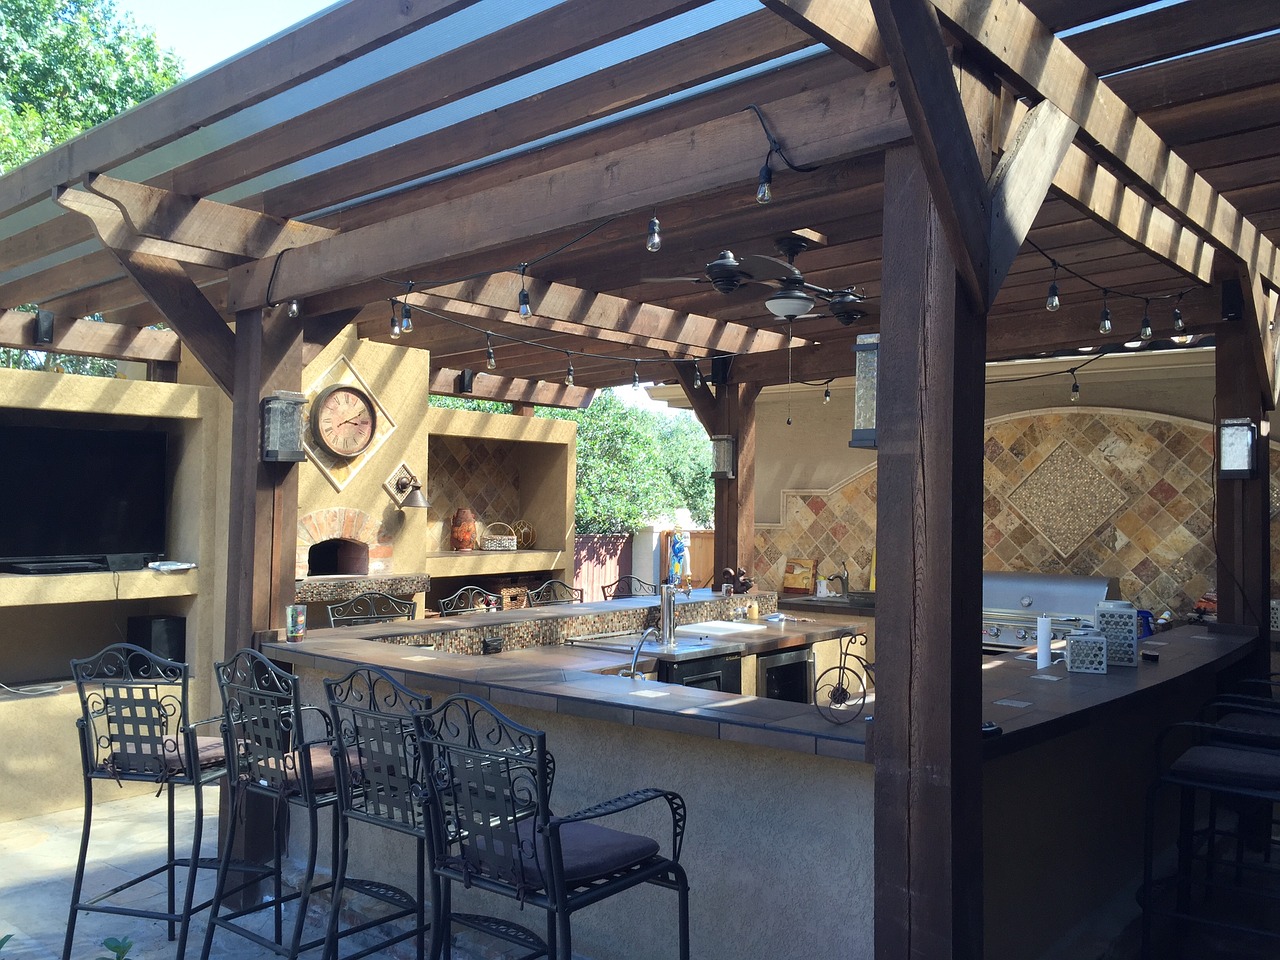 An outdoor kitchen can Add Value to your Home